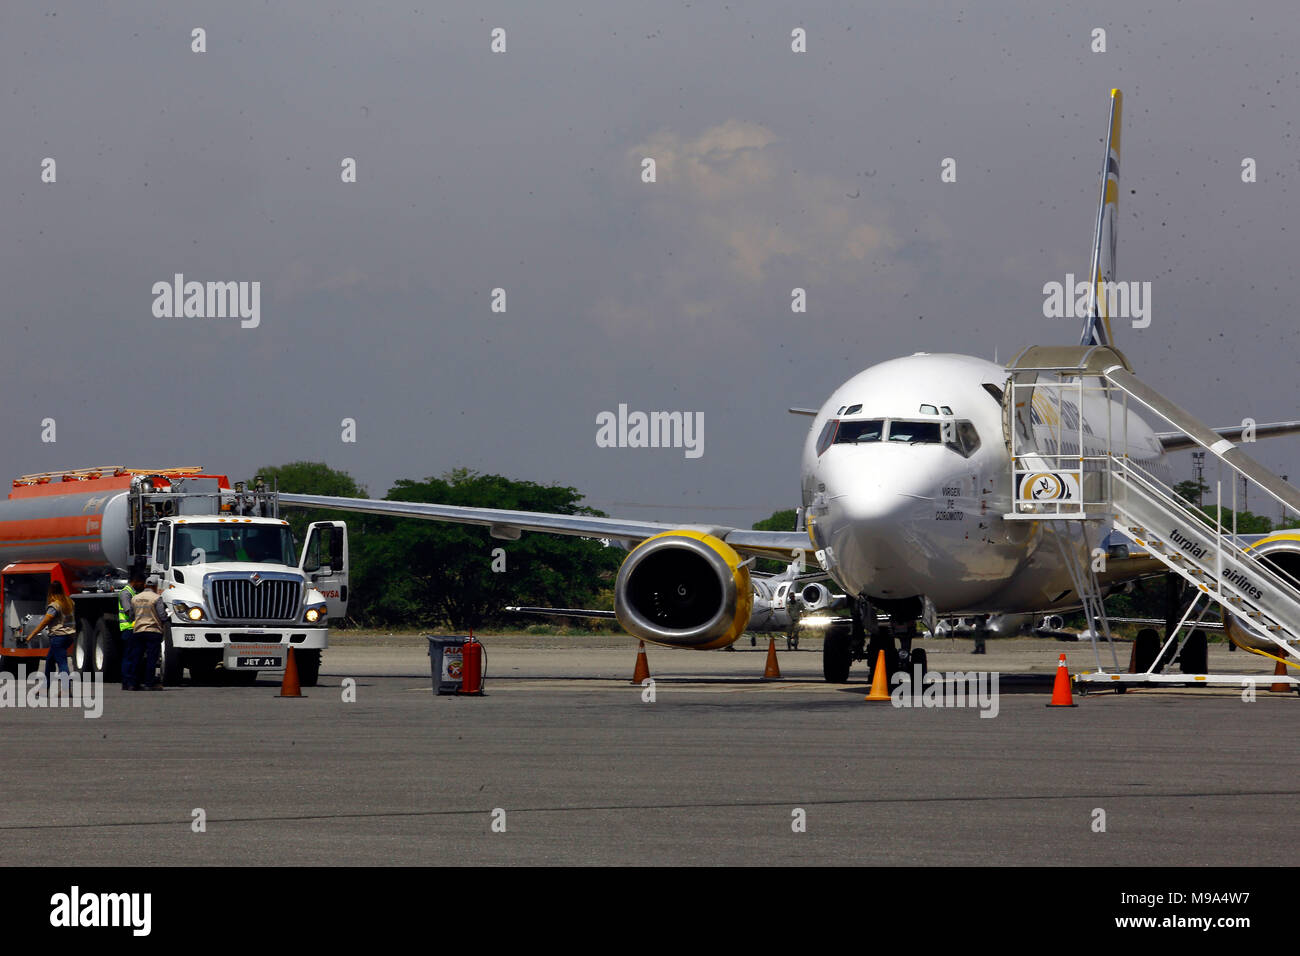 Valencia, Carabobo, Venezuela. 23rd Mar, 2018. March 23, 2018. The Turpial airline opened a new air route between the cities of Valencia in Venezuela to Santo Domingo and Punta Cana, in the Dominican Republic and vice versa. The regularity will be two days a week, Monday and Friday. The inaugural flight was 8606, with 30 passengers plus the crew departed from the Arturo Michelena airport. Photo: Juan Carlos Hernandez Credit: Juan Carlos Hernandez/ZUMA Wire/Alamy Live News Stock Photo